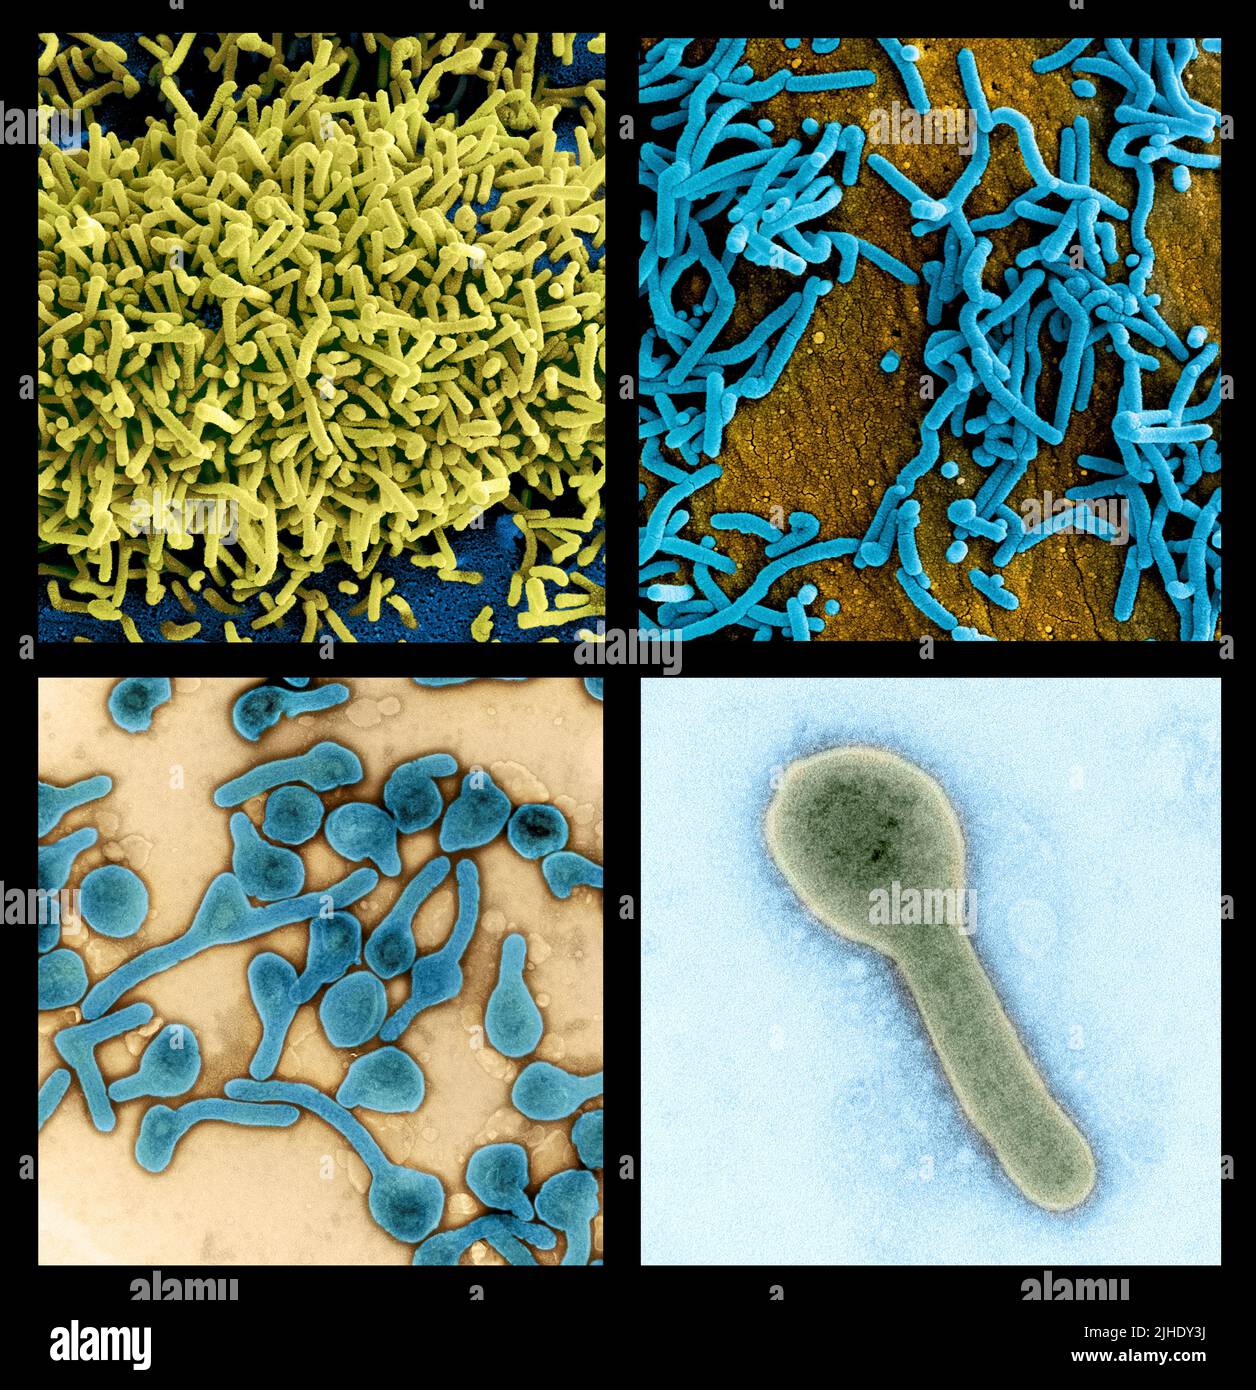 Ghana has confirmed its first two cases of the deadly Marburg virus, a highly infectious disease in the same family as the virus that causes Ebola. Both patients died in hospital in the Ashanti region in the south of the country. 18 July 2022  A unique composite of 4 scanning electron micrograph images of Marburg virus particles harvested from infected VERO E6 cells. High resolution (c.40x40cm at 300dpi; 70MB) files that can be edited to single images as desired.  An optimised and enhanced unique composite version of 4 scanning electron micrograph images, Credit: NIAID / Alamy LIve News Stock Photo